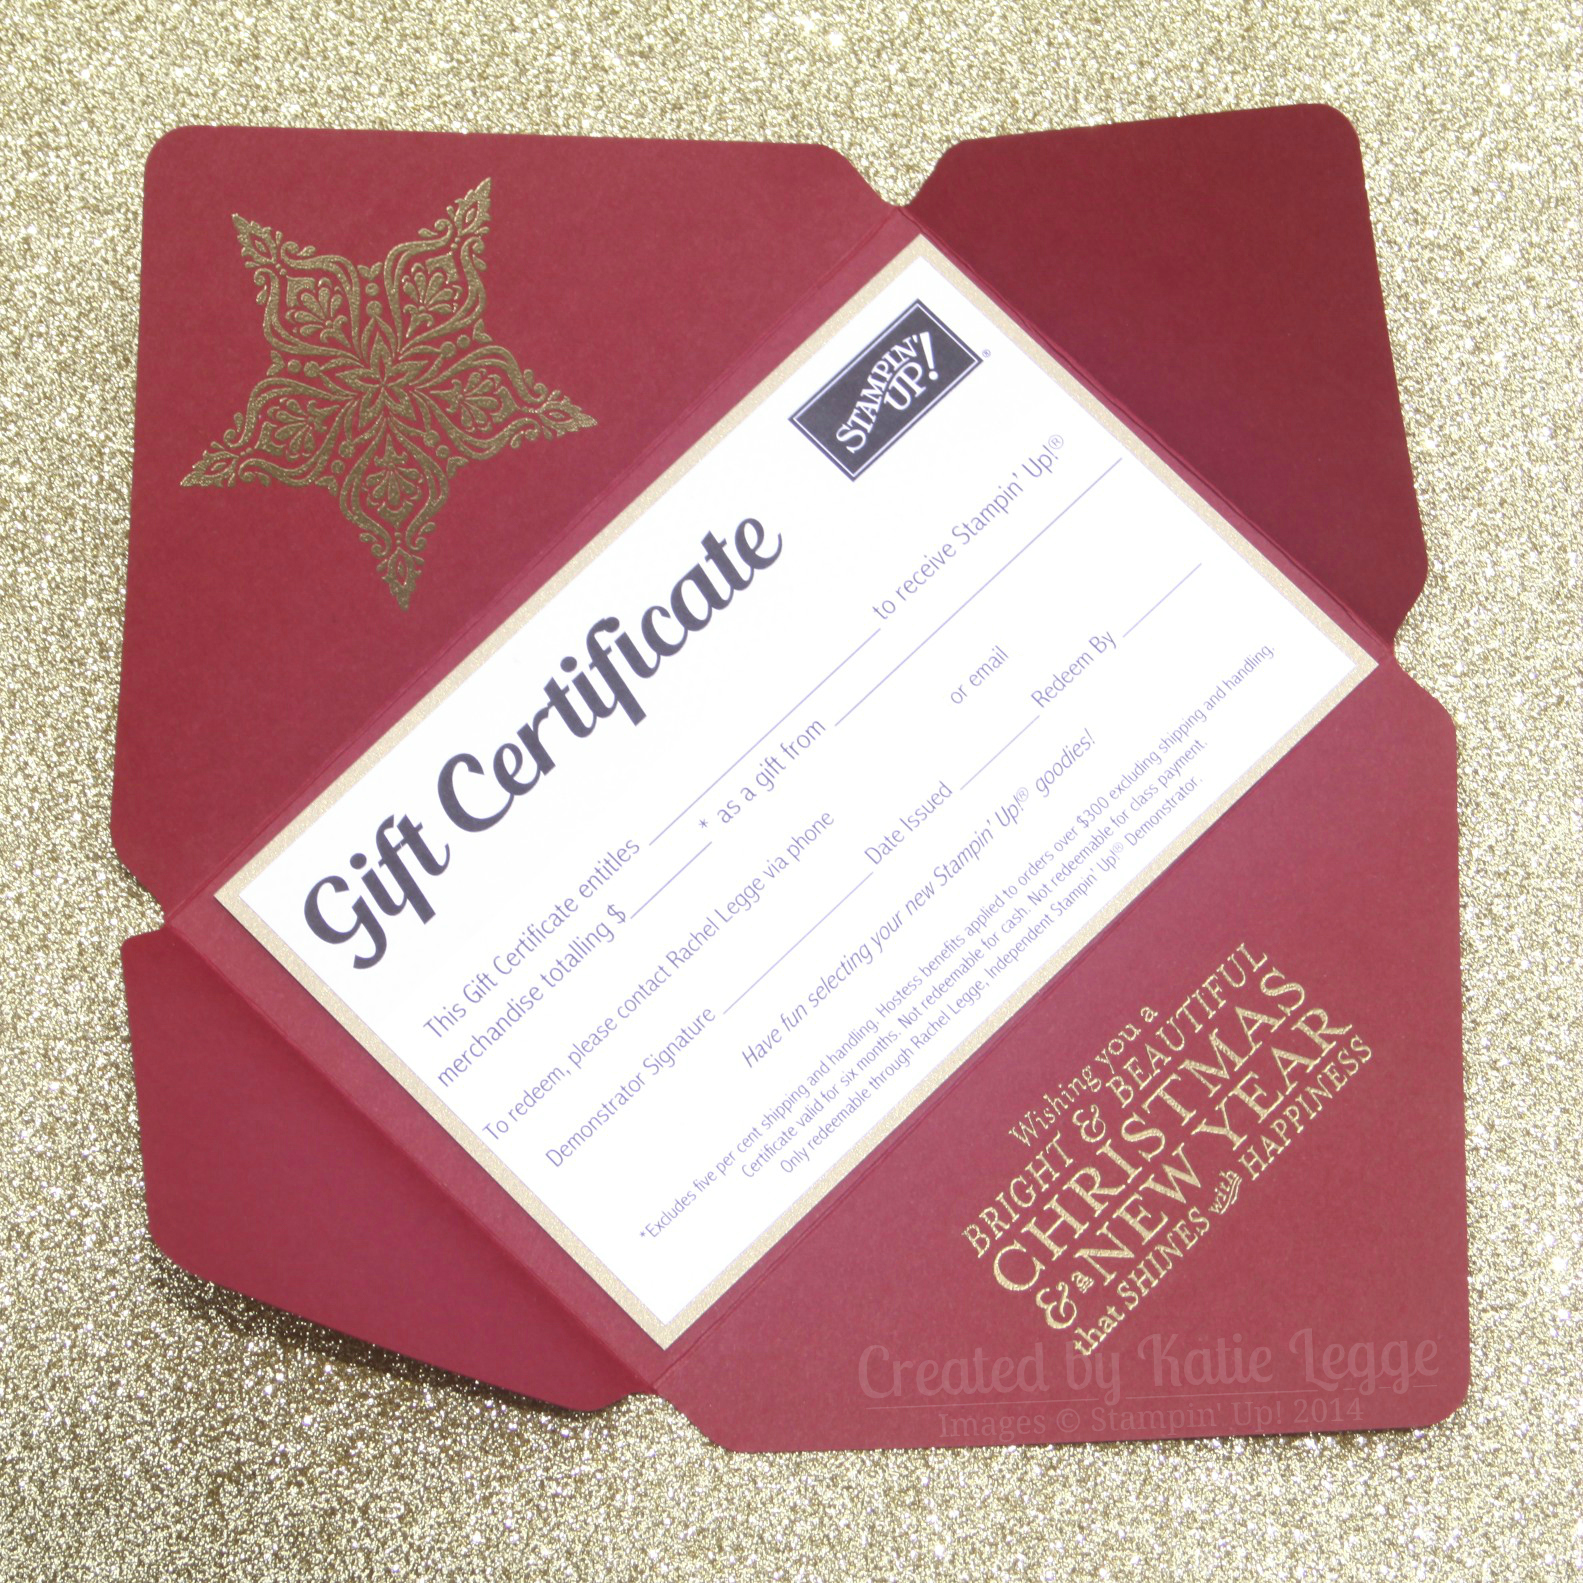 Stampin Up Christmas Gift Certificate – Envelope open – Katie and 